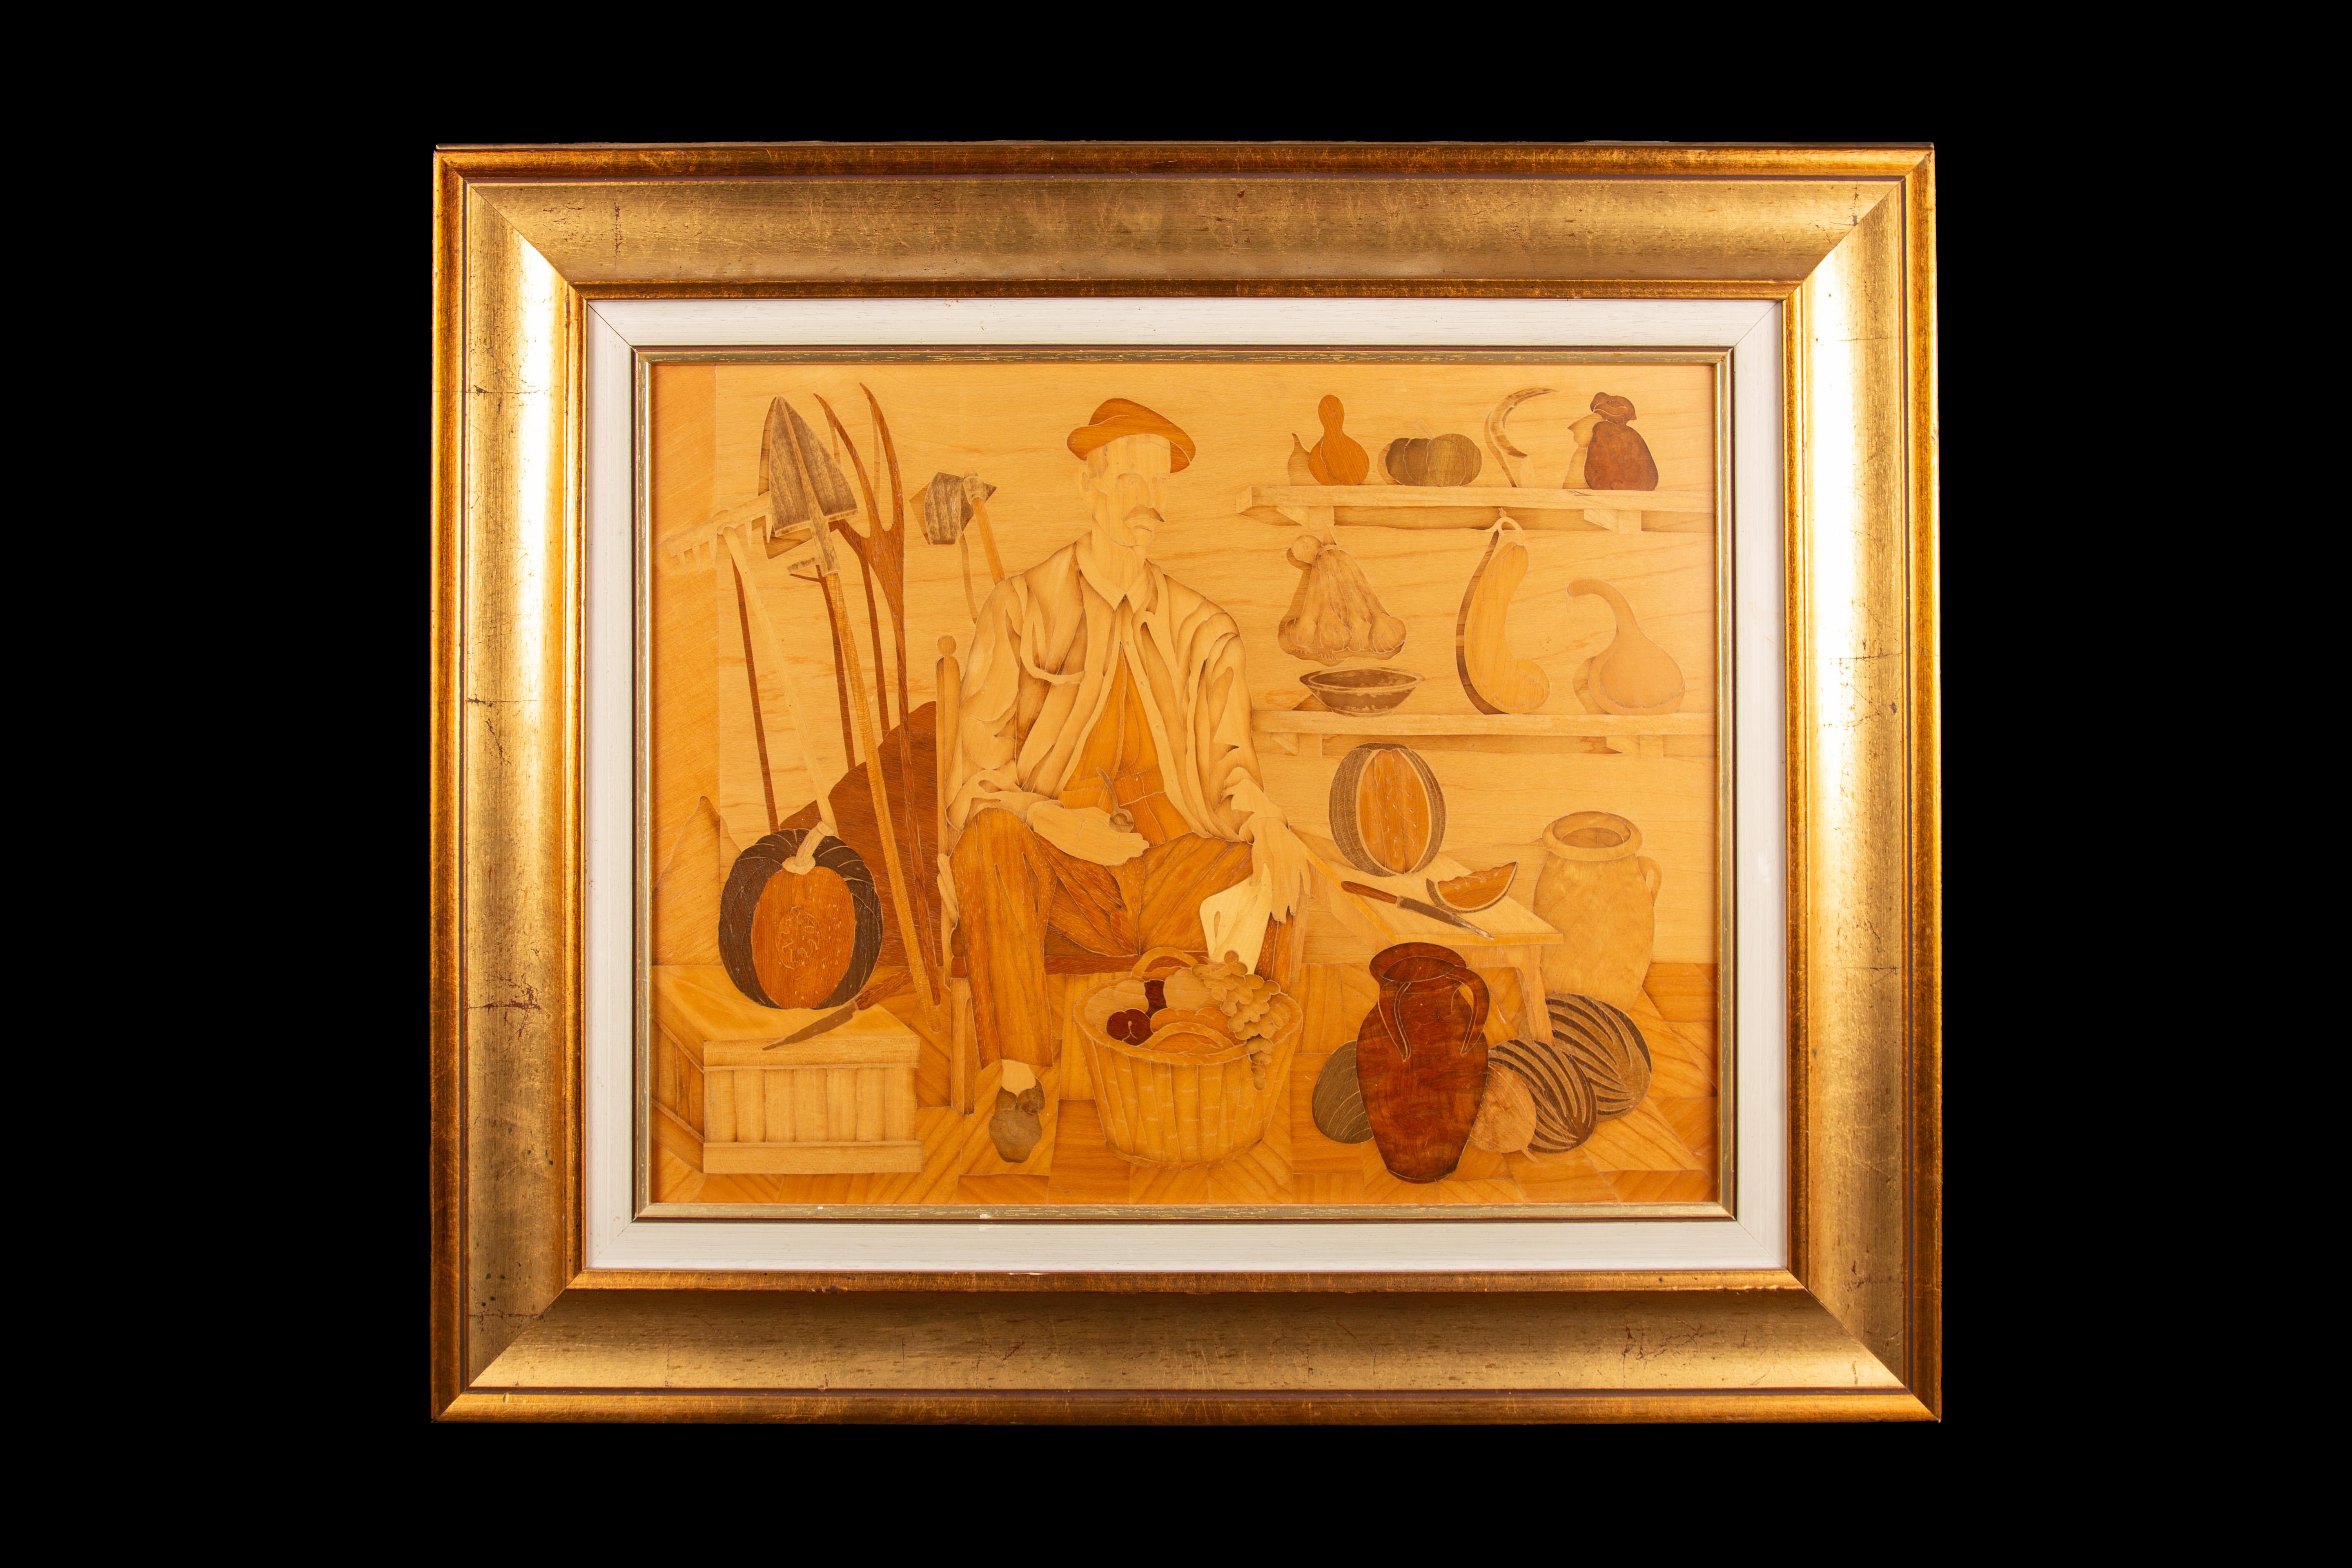 This captivating Framed Marquetry Panel portrays a charming scene of a contented farmer seated in a room adorned with an abundance of nature's bounty. The intricate craftsmanship of the marquetry technique is evident in the meticulous arrangement of